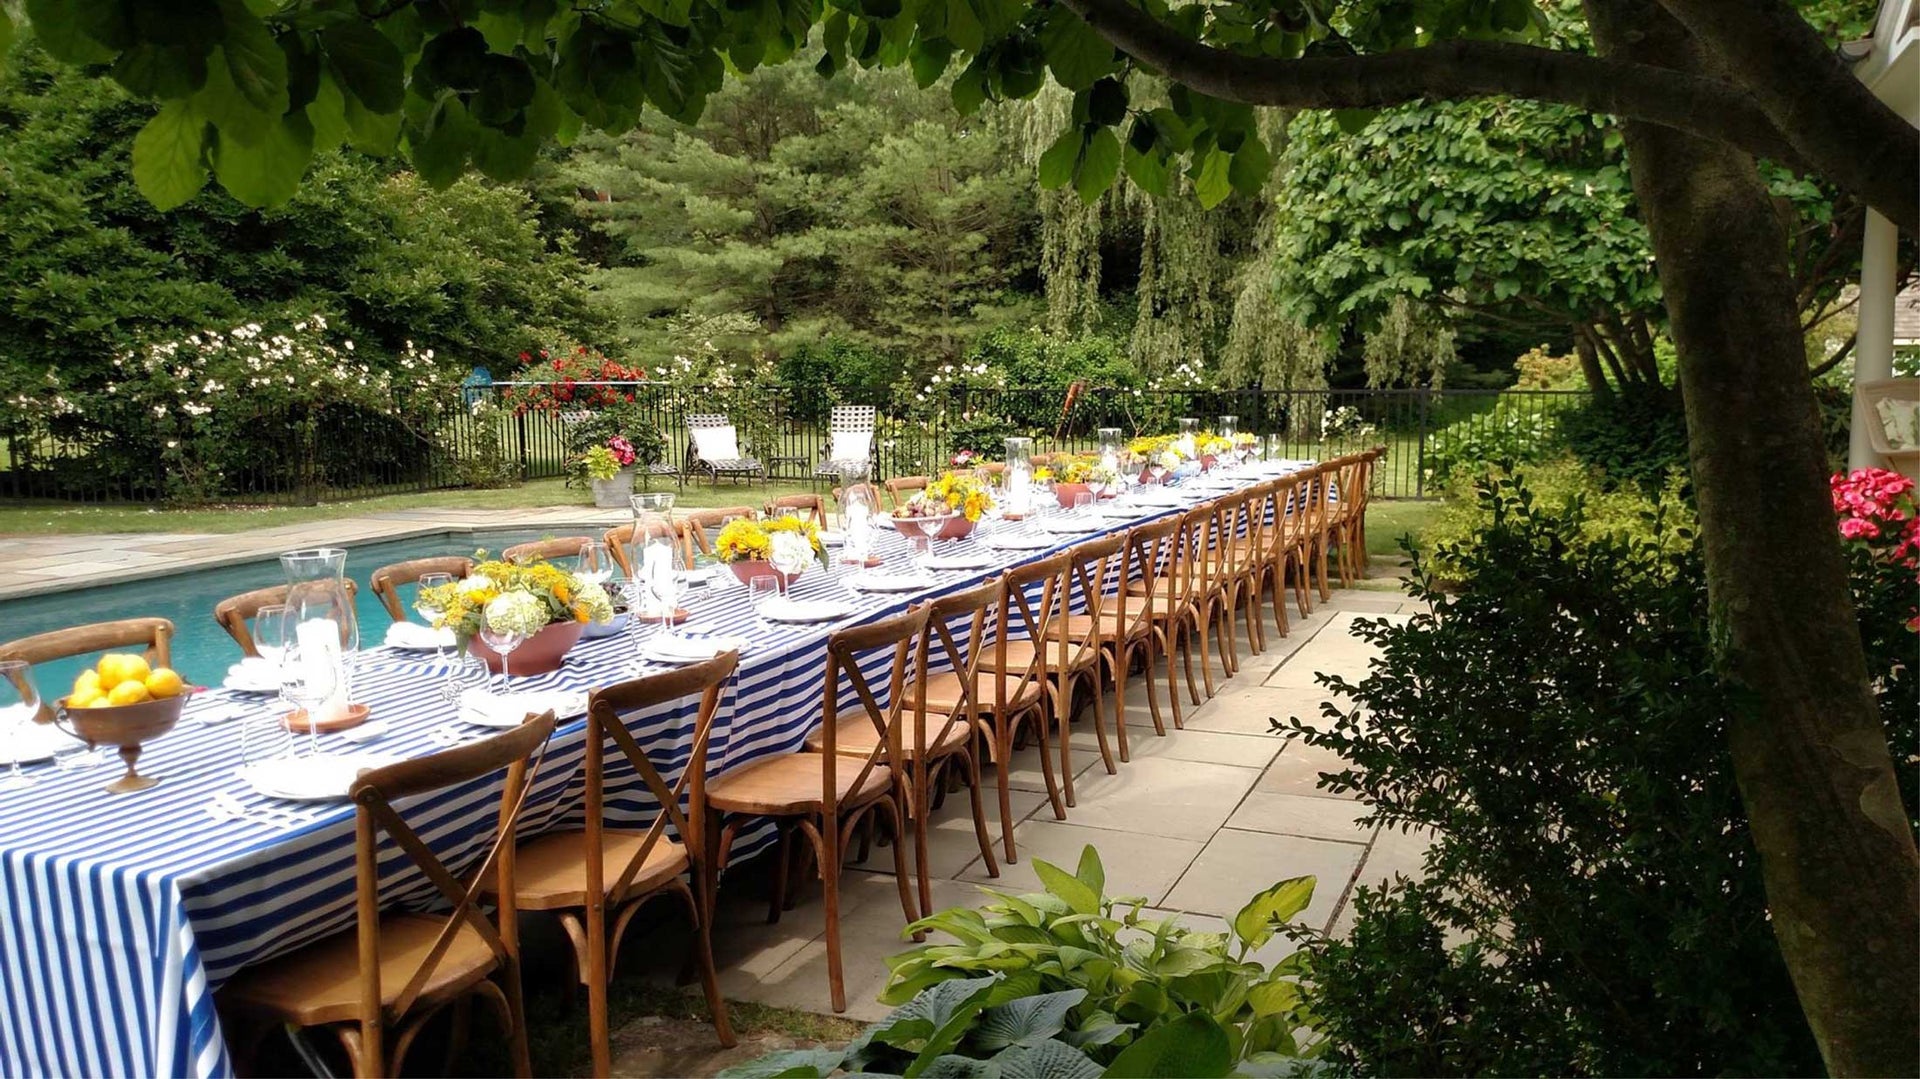 A party setup poolside featuring blue and white striped tables and center pieces full of lemons.